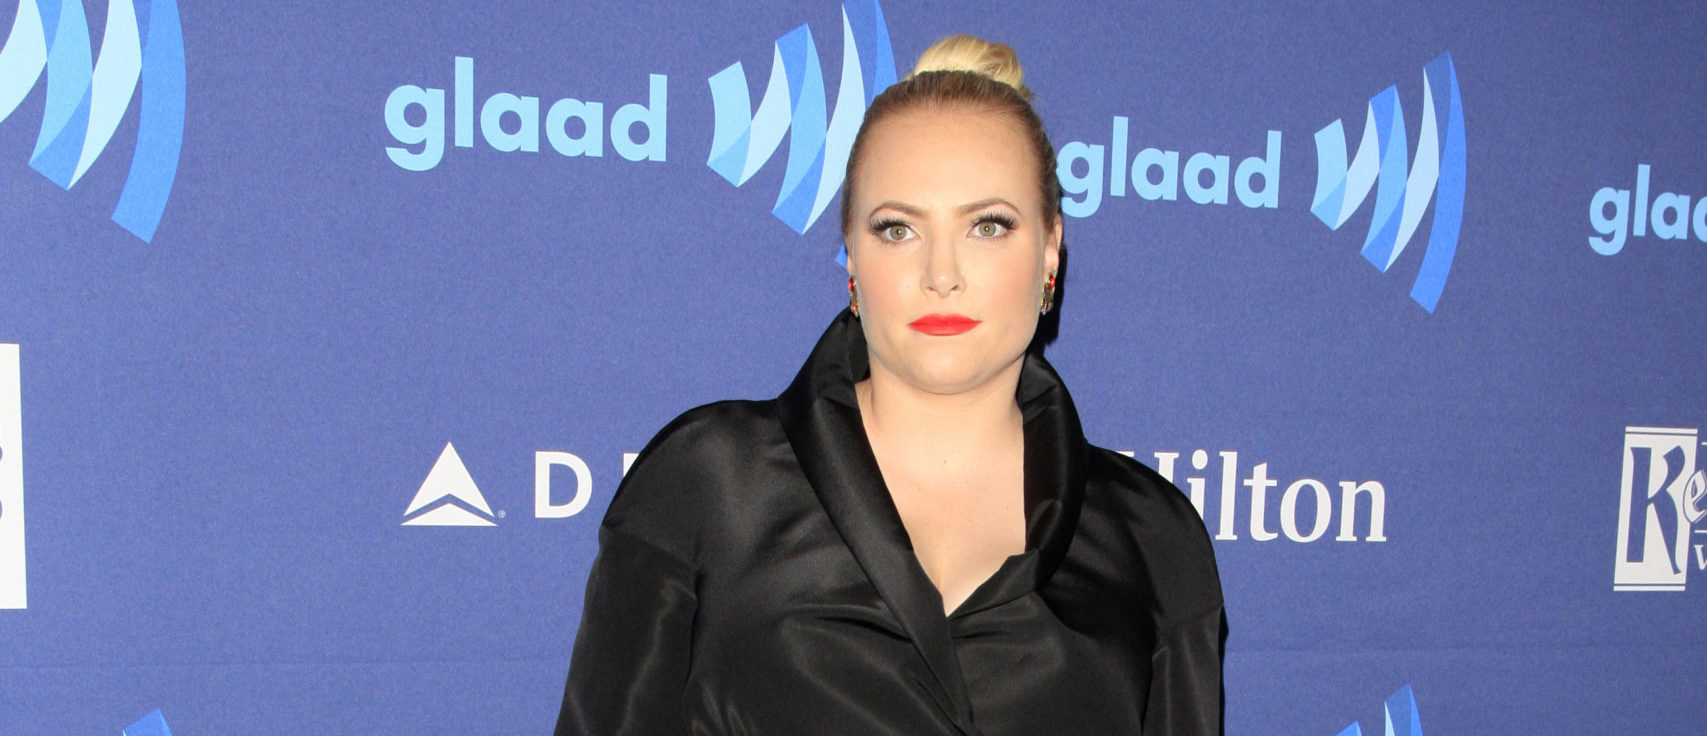 ‘Nobody Missed You’: Meghan McCain Shares More Horrendous Comments She Received From Joy Behar